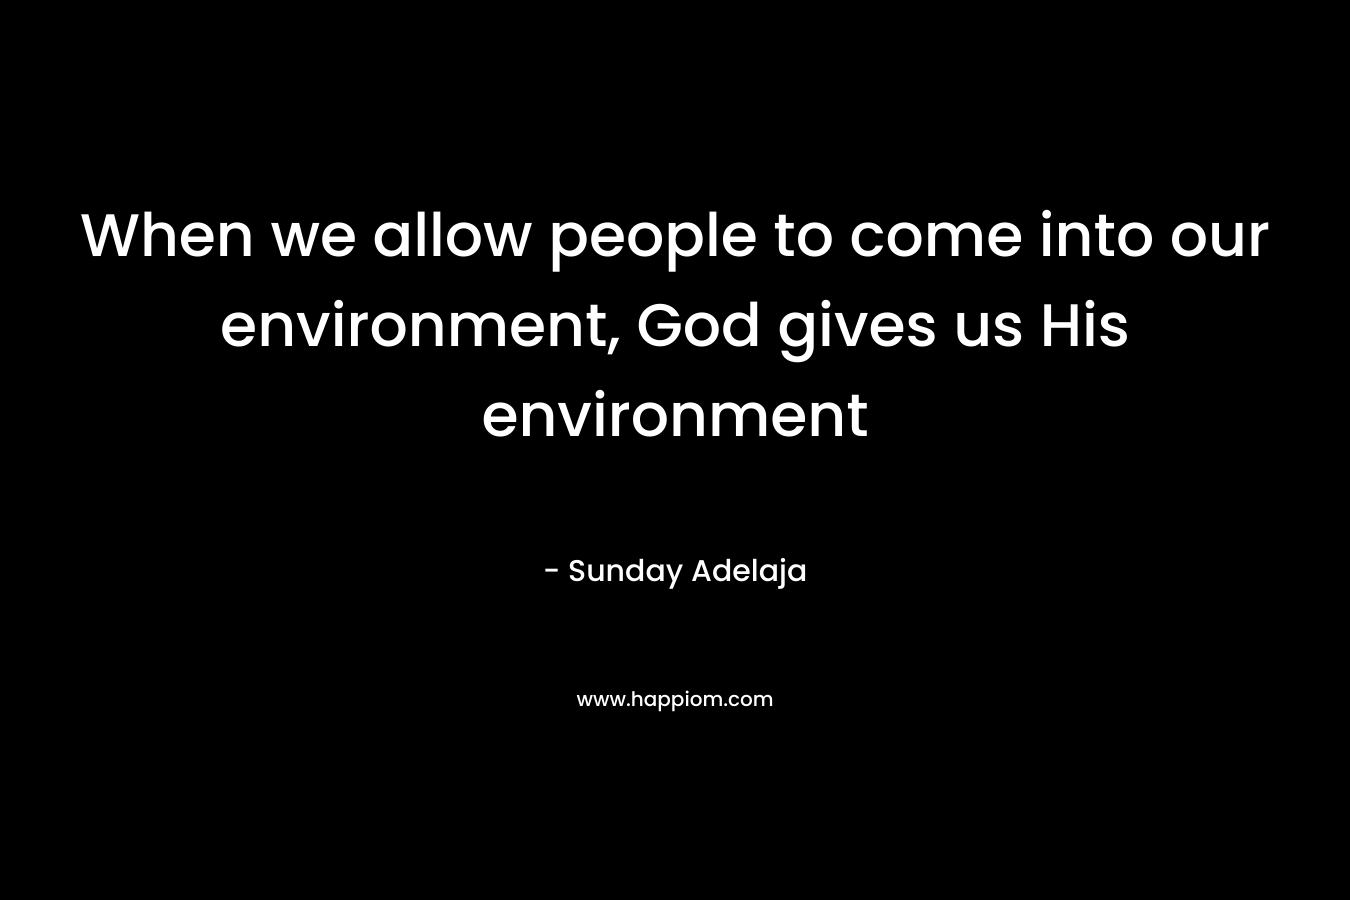 When we allow people to come into our environment, God gives us His environment